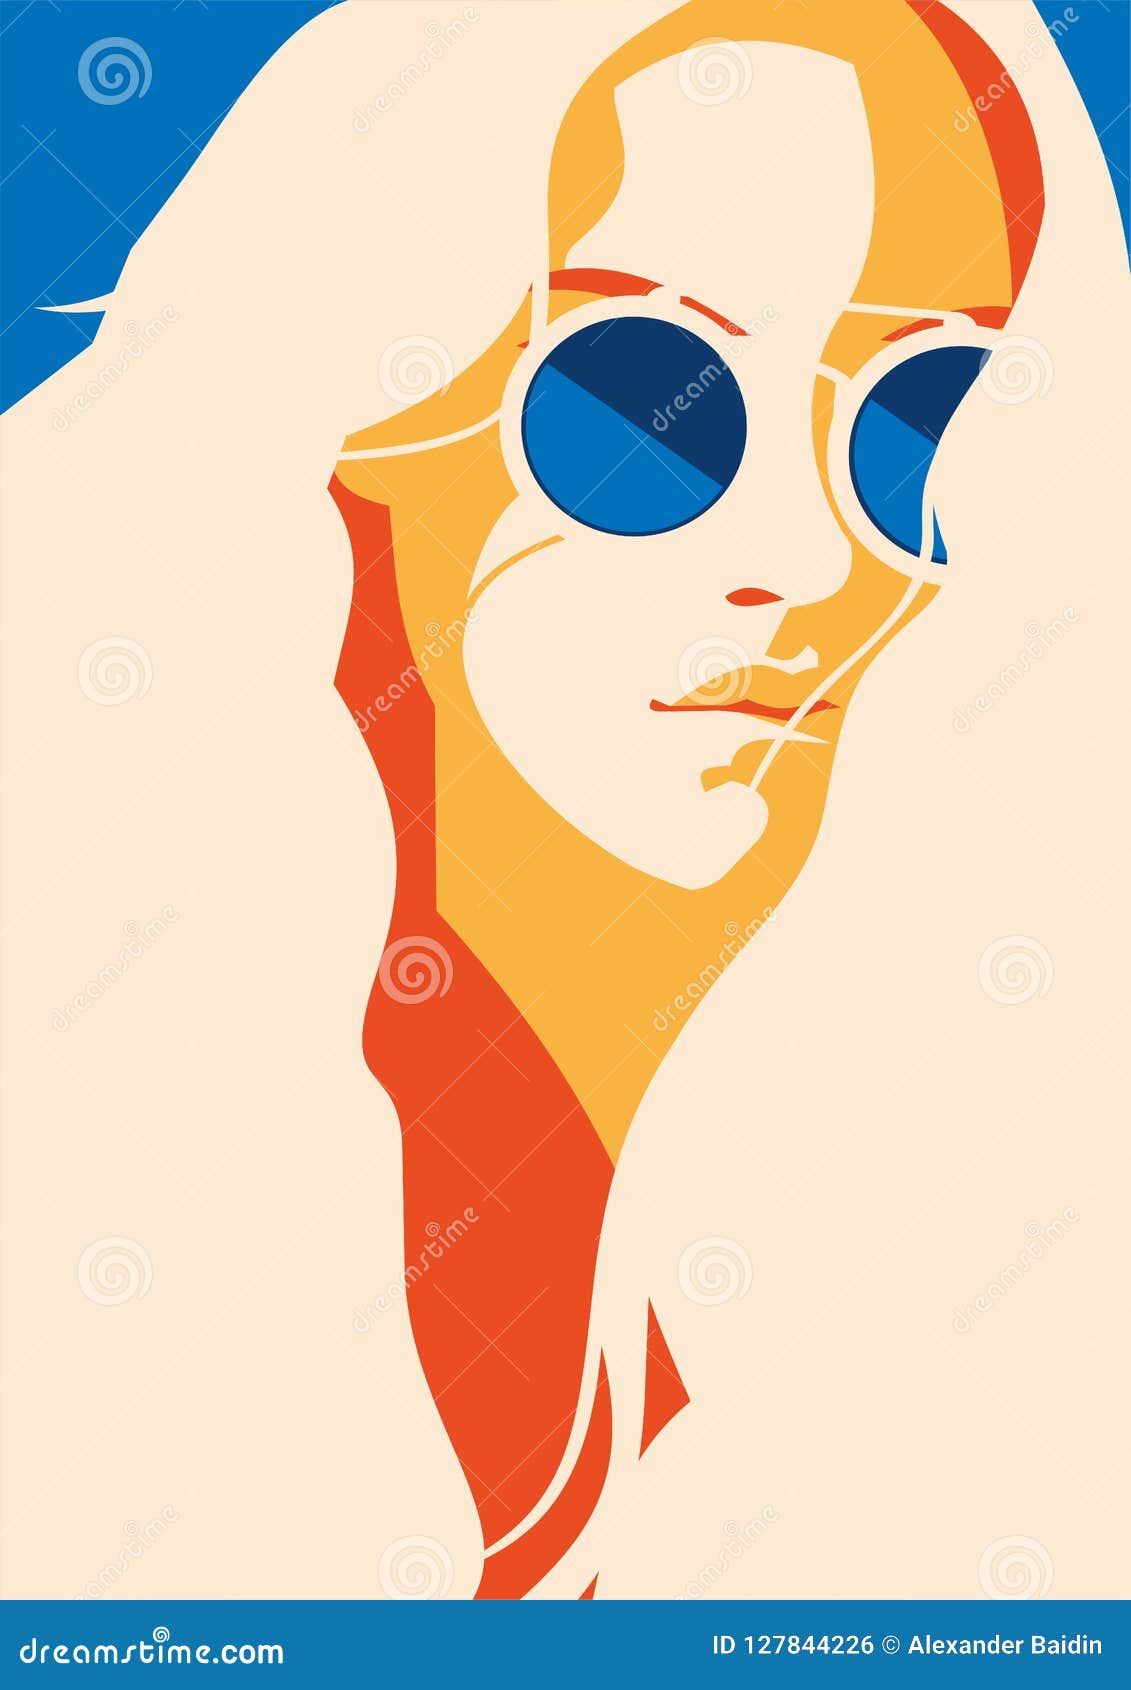 fashion portrait of a model girl with sunglasses. retro trendy colors poster or flyer.